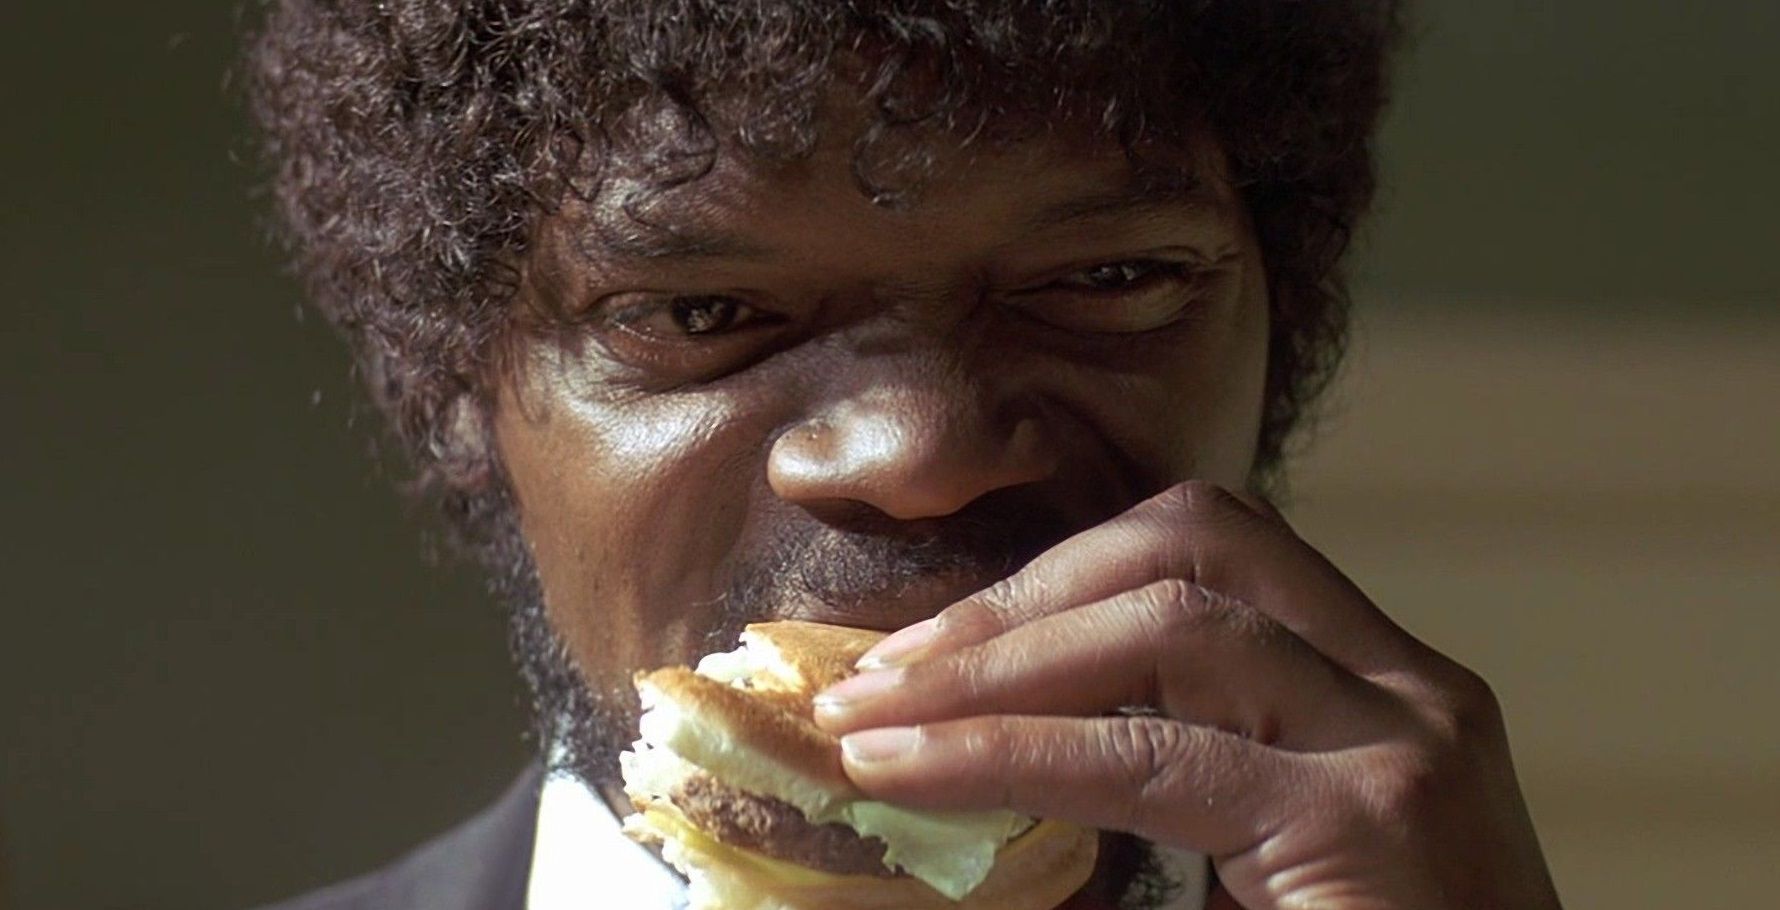 Jules easts the Big Kahuna Burger in Pulp Fiction